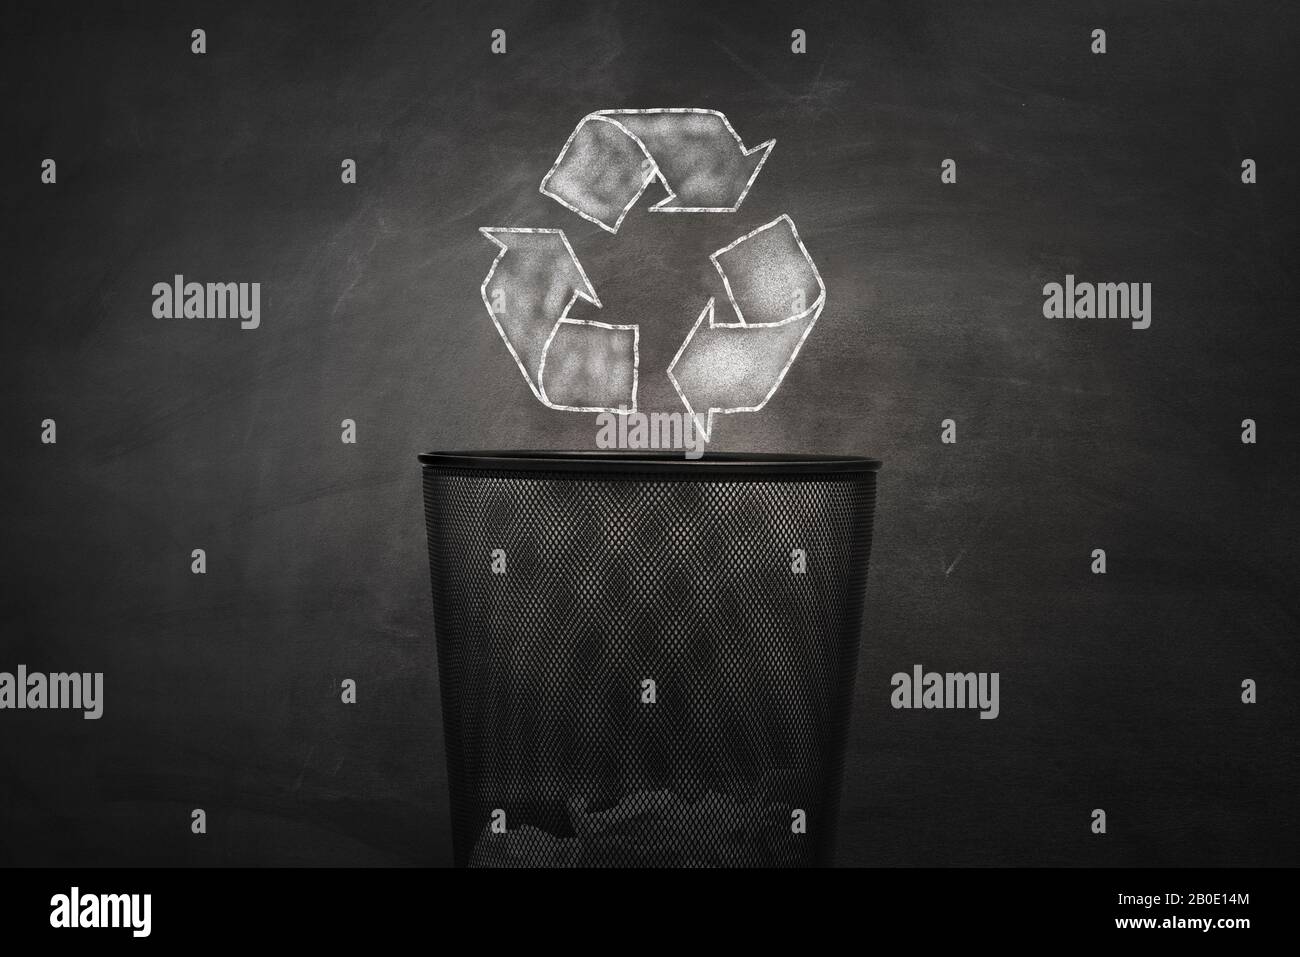 shape of the symbol of recycling on chalkboard. Protection nature and future concept Stock Photo